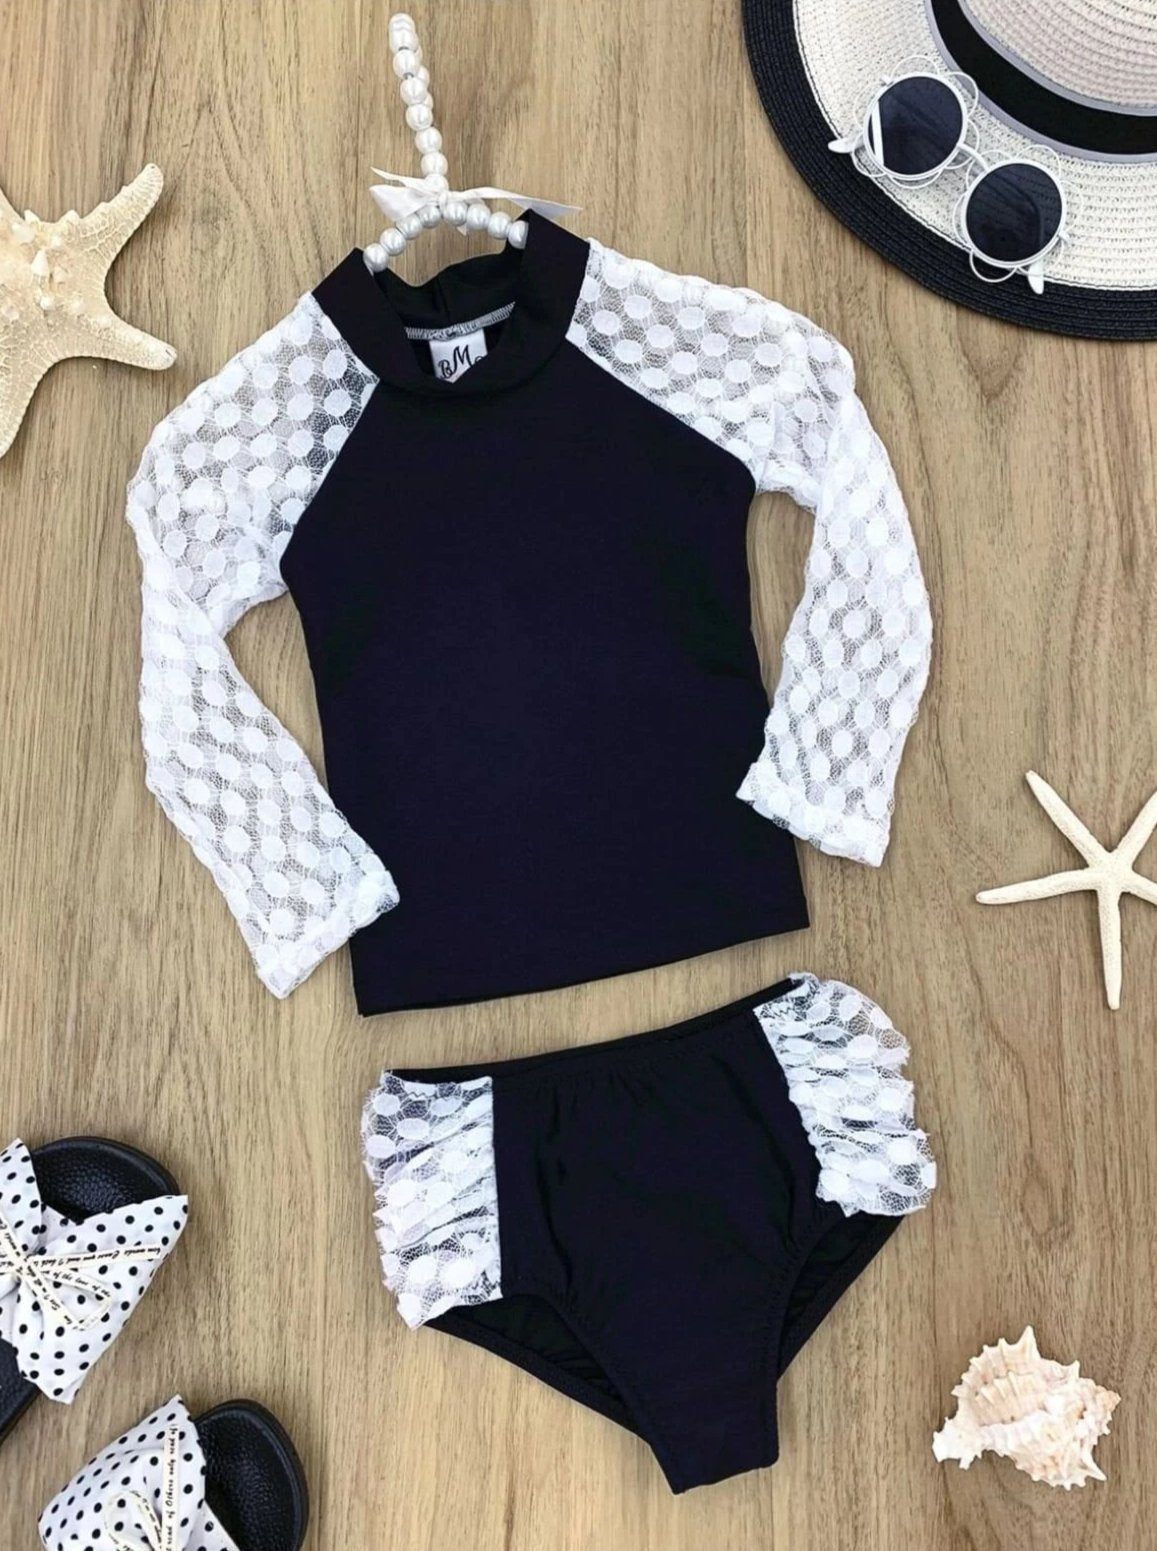 Toddler Rash Guard Swimsuit | Girls Lace Sleeve Two Piece Swimsuit